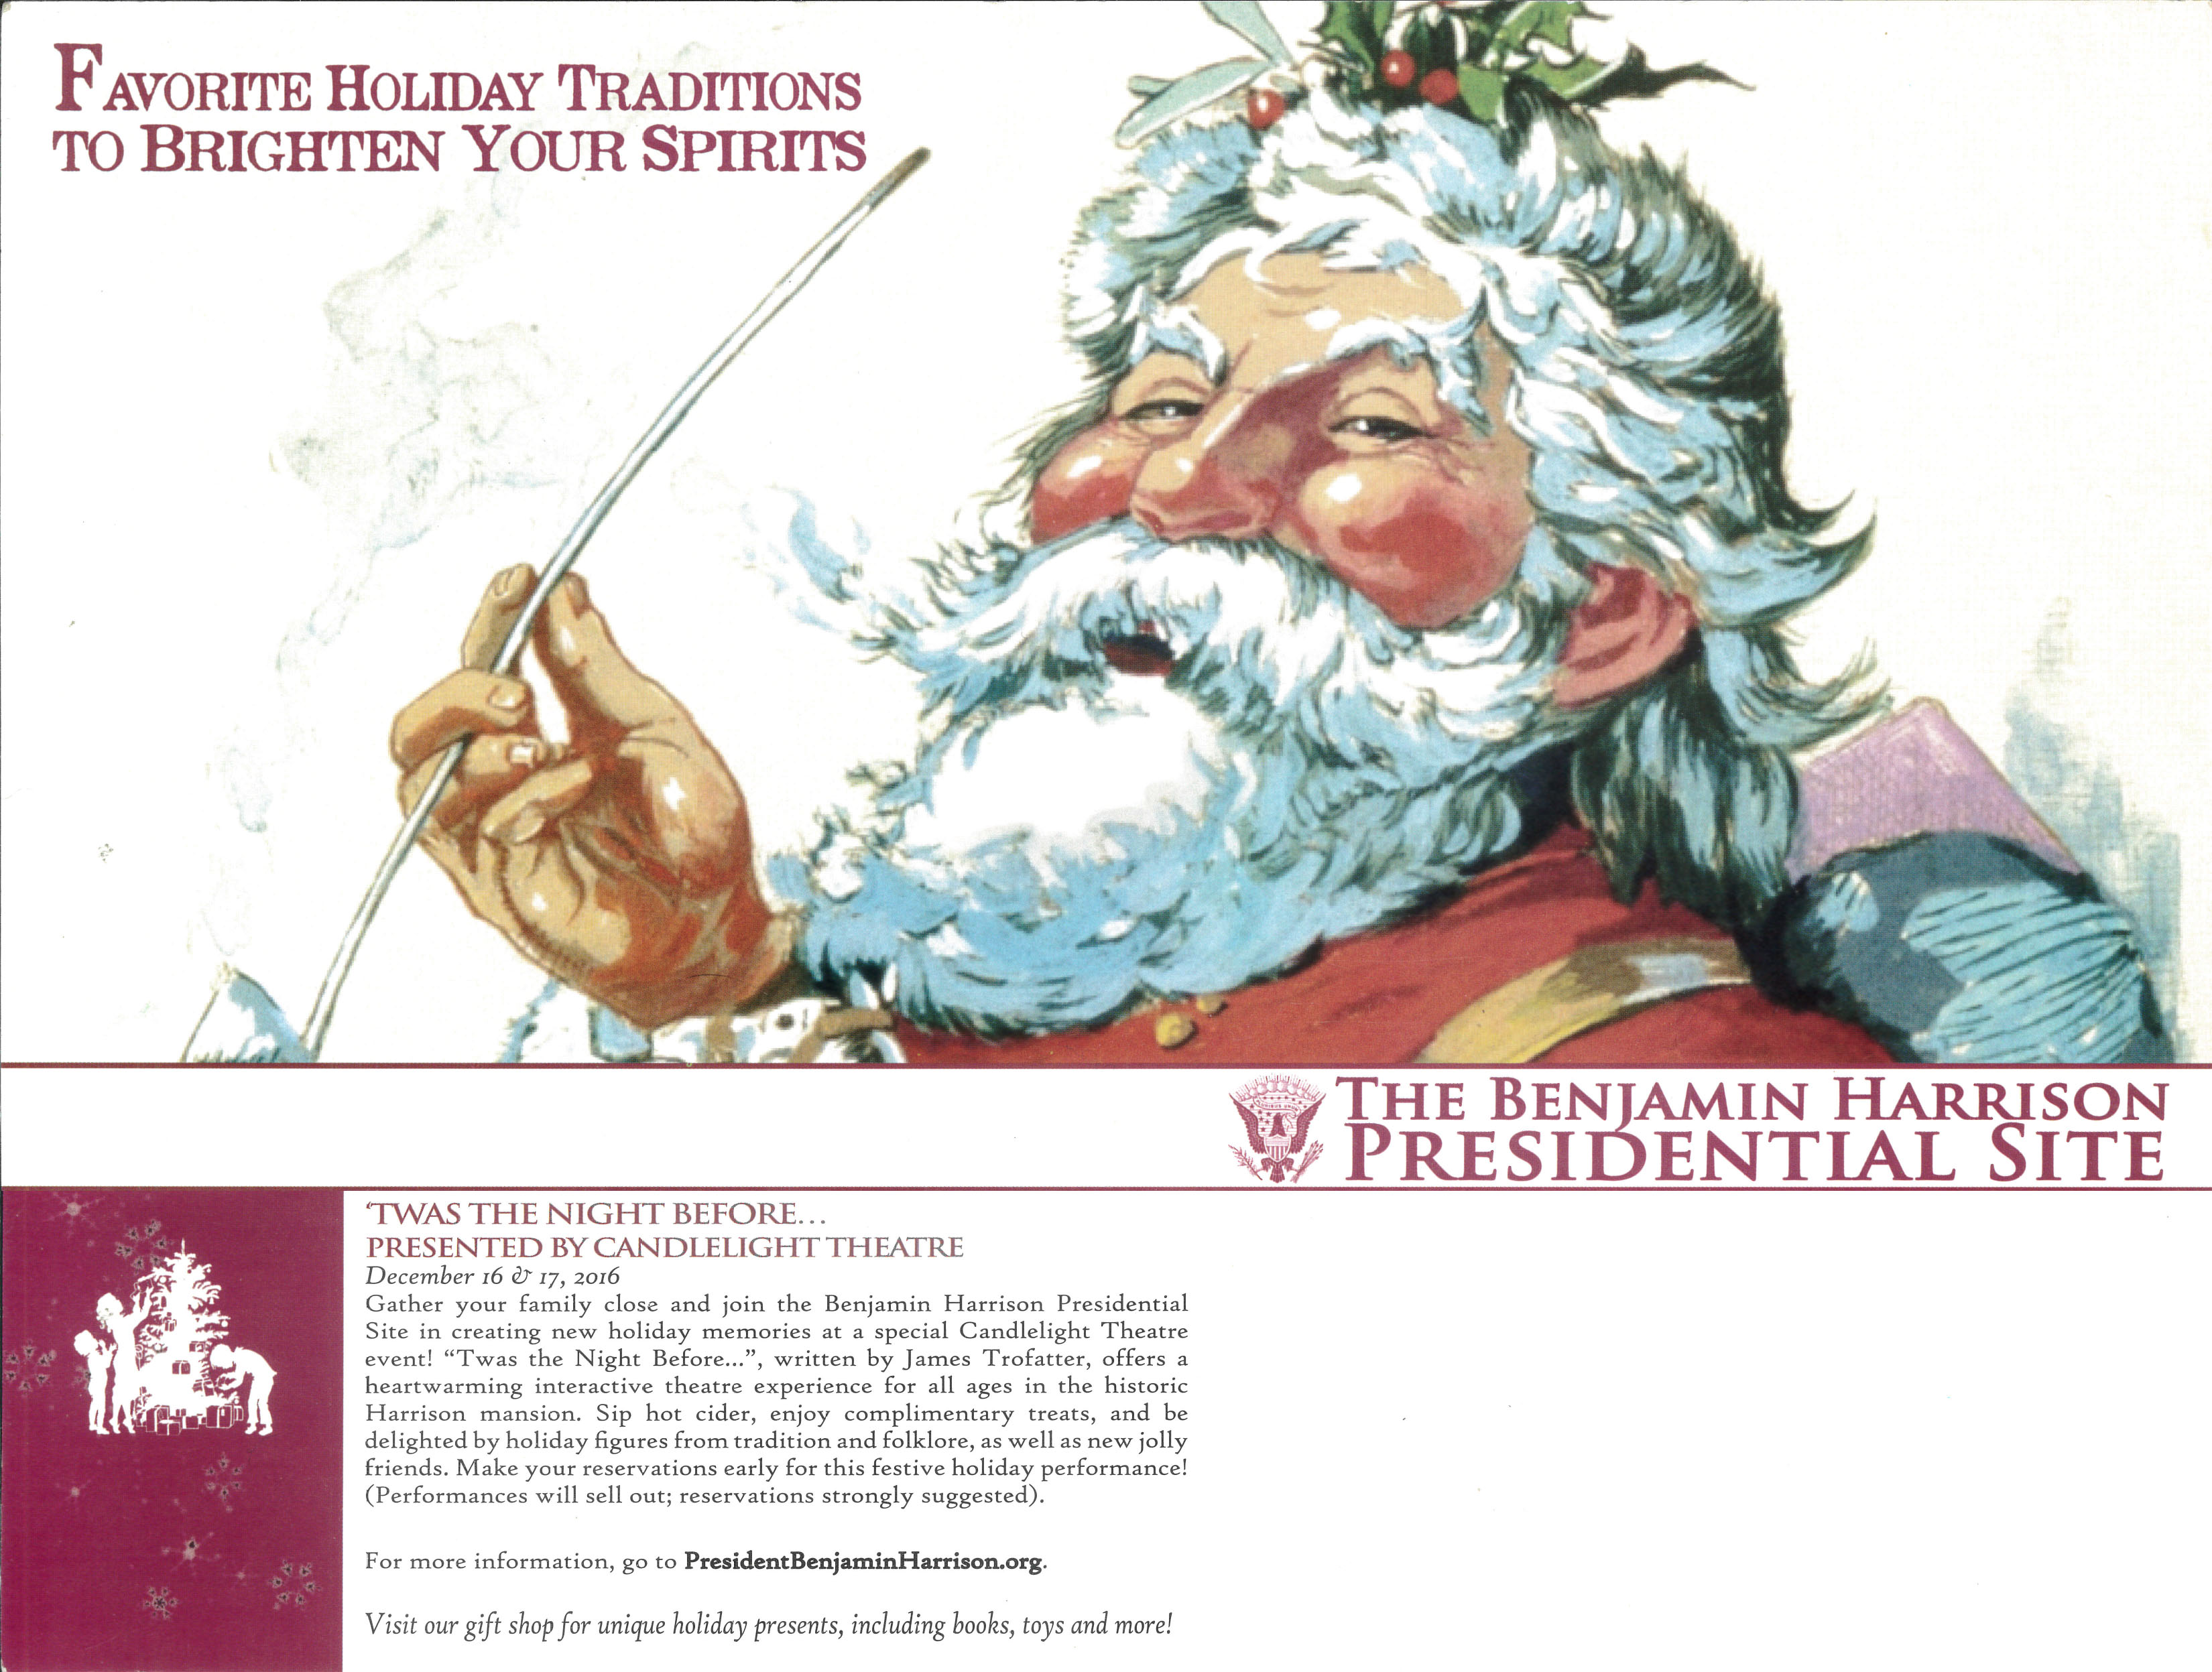 Promotional image for favorite twas the night before depicting an early nineteen hundreds style illustration of santa claus holding a long, thin pipe. He looks at the camera with a big smile and rosy cheeks, and mistletoe on his head. The text on the image reads, favorite holiday traditions to brighten your spirits. the benjamin harrison presidential site. twas the night before, presented by candlelight theatre. december 16 and 17, 2016. gather your family close and join the benjamin harrison presidential site in creating new holiday memories at a special candlelight theatre event! twas the night before, written by james trofatter, offers a heartwarming interactive theater experience for all ages in the historic harrison mansion. sip hot cider, enjoy complementary treats, and be delighted by holiday figures from tradition and folklore, as well as new jolly friends. make your reservations early for this festive holiday performance! performances will sell out, reservations strongly suggested. for more information, go to president benjamin harrison dot org. visit our gift shop for unique holiday presents, including books, toys, and more!